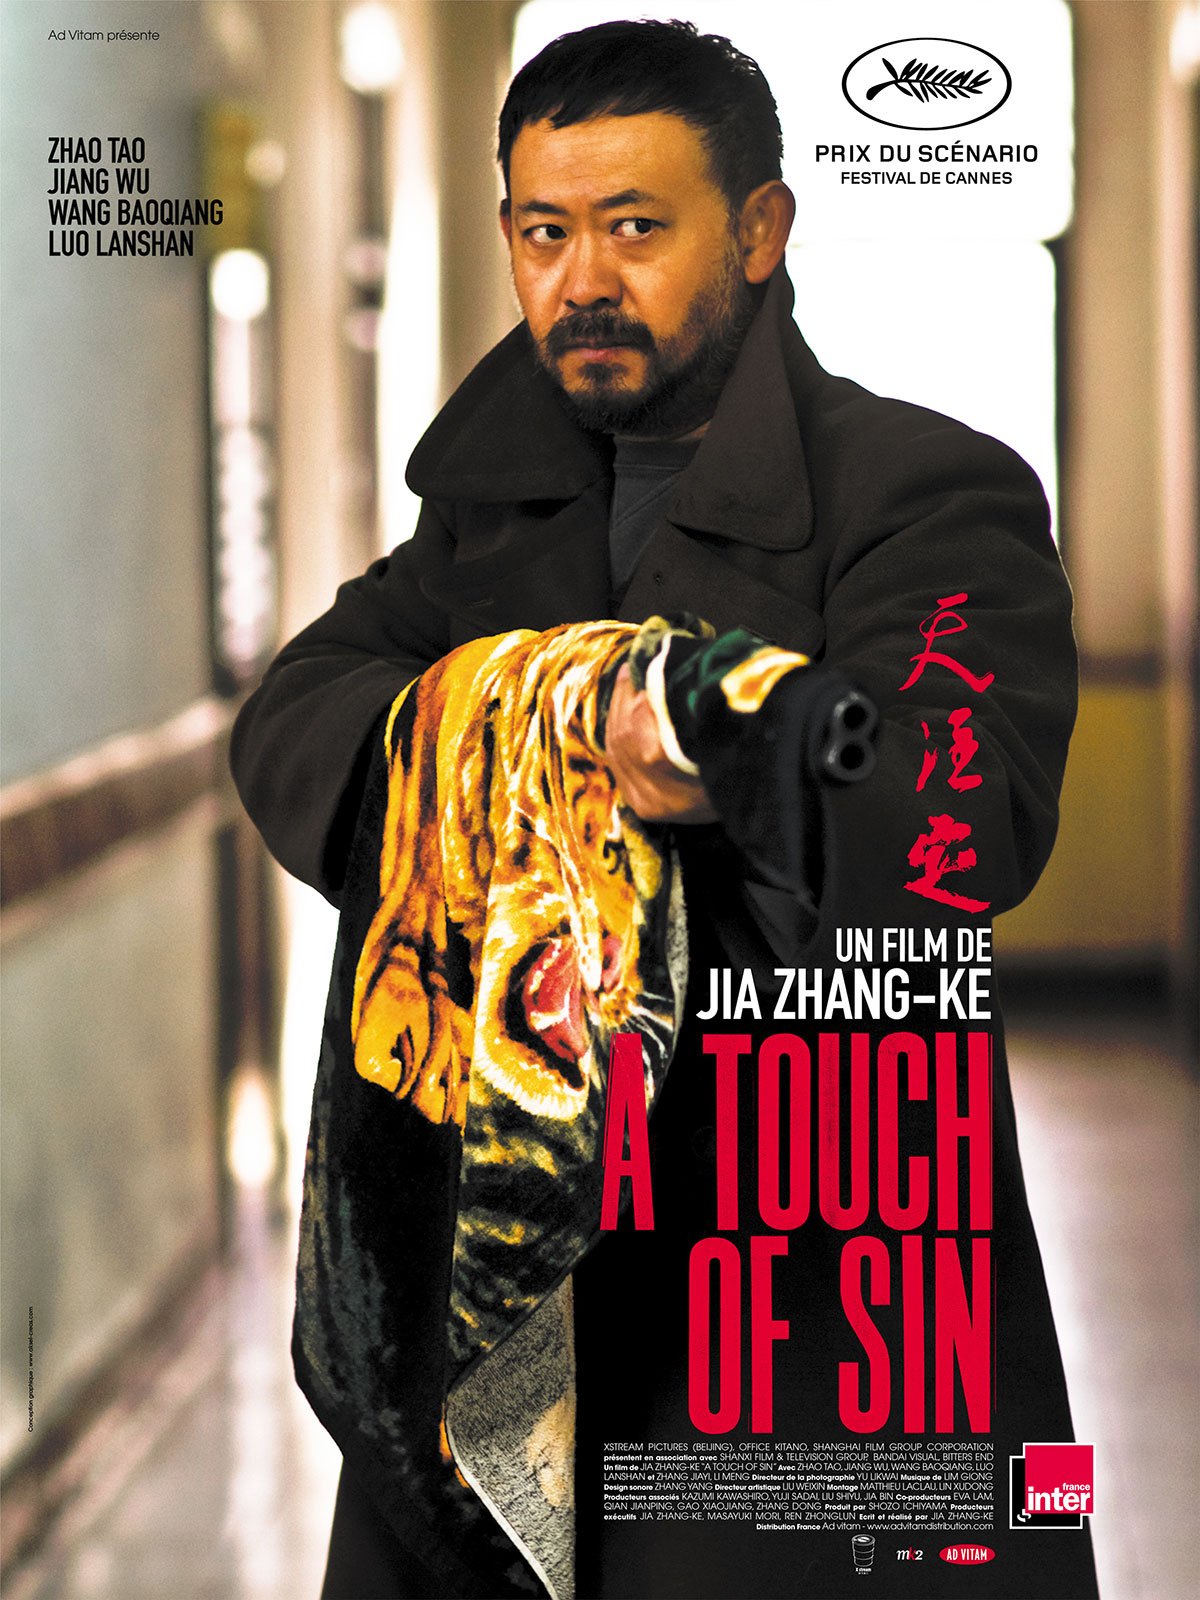 A Touch of Sin streaming vf gratuit